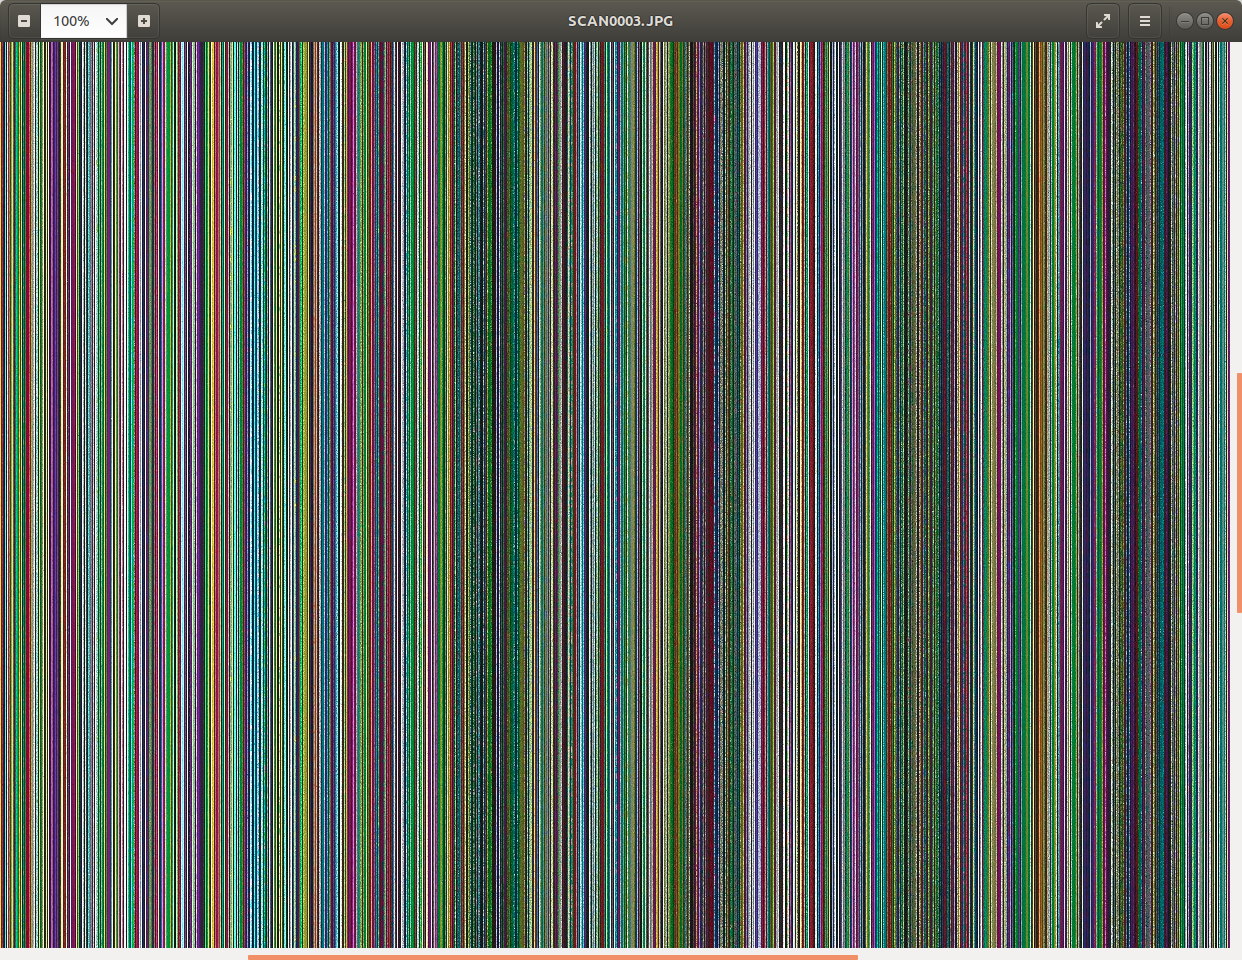 scanning produces vertical colored lines - HP Support Community - 6439982